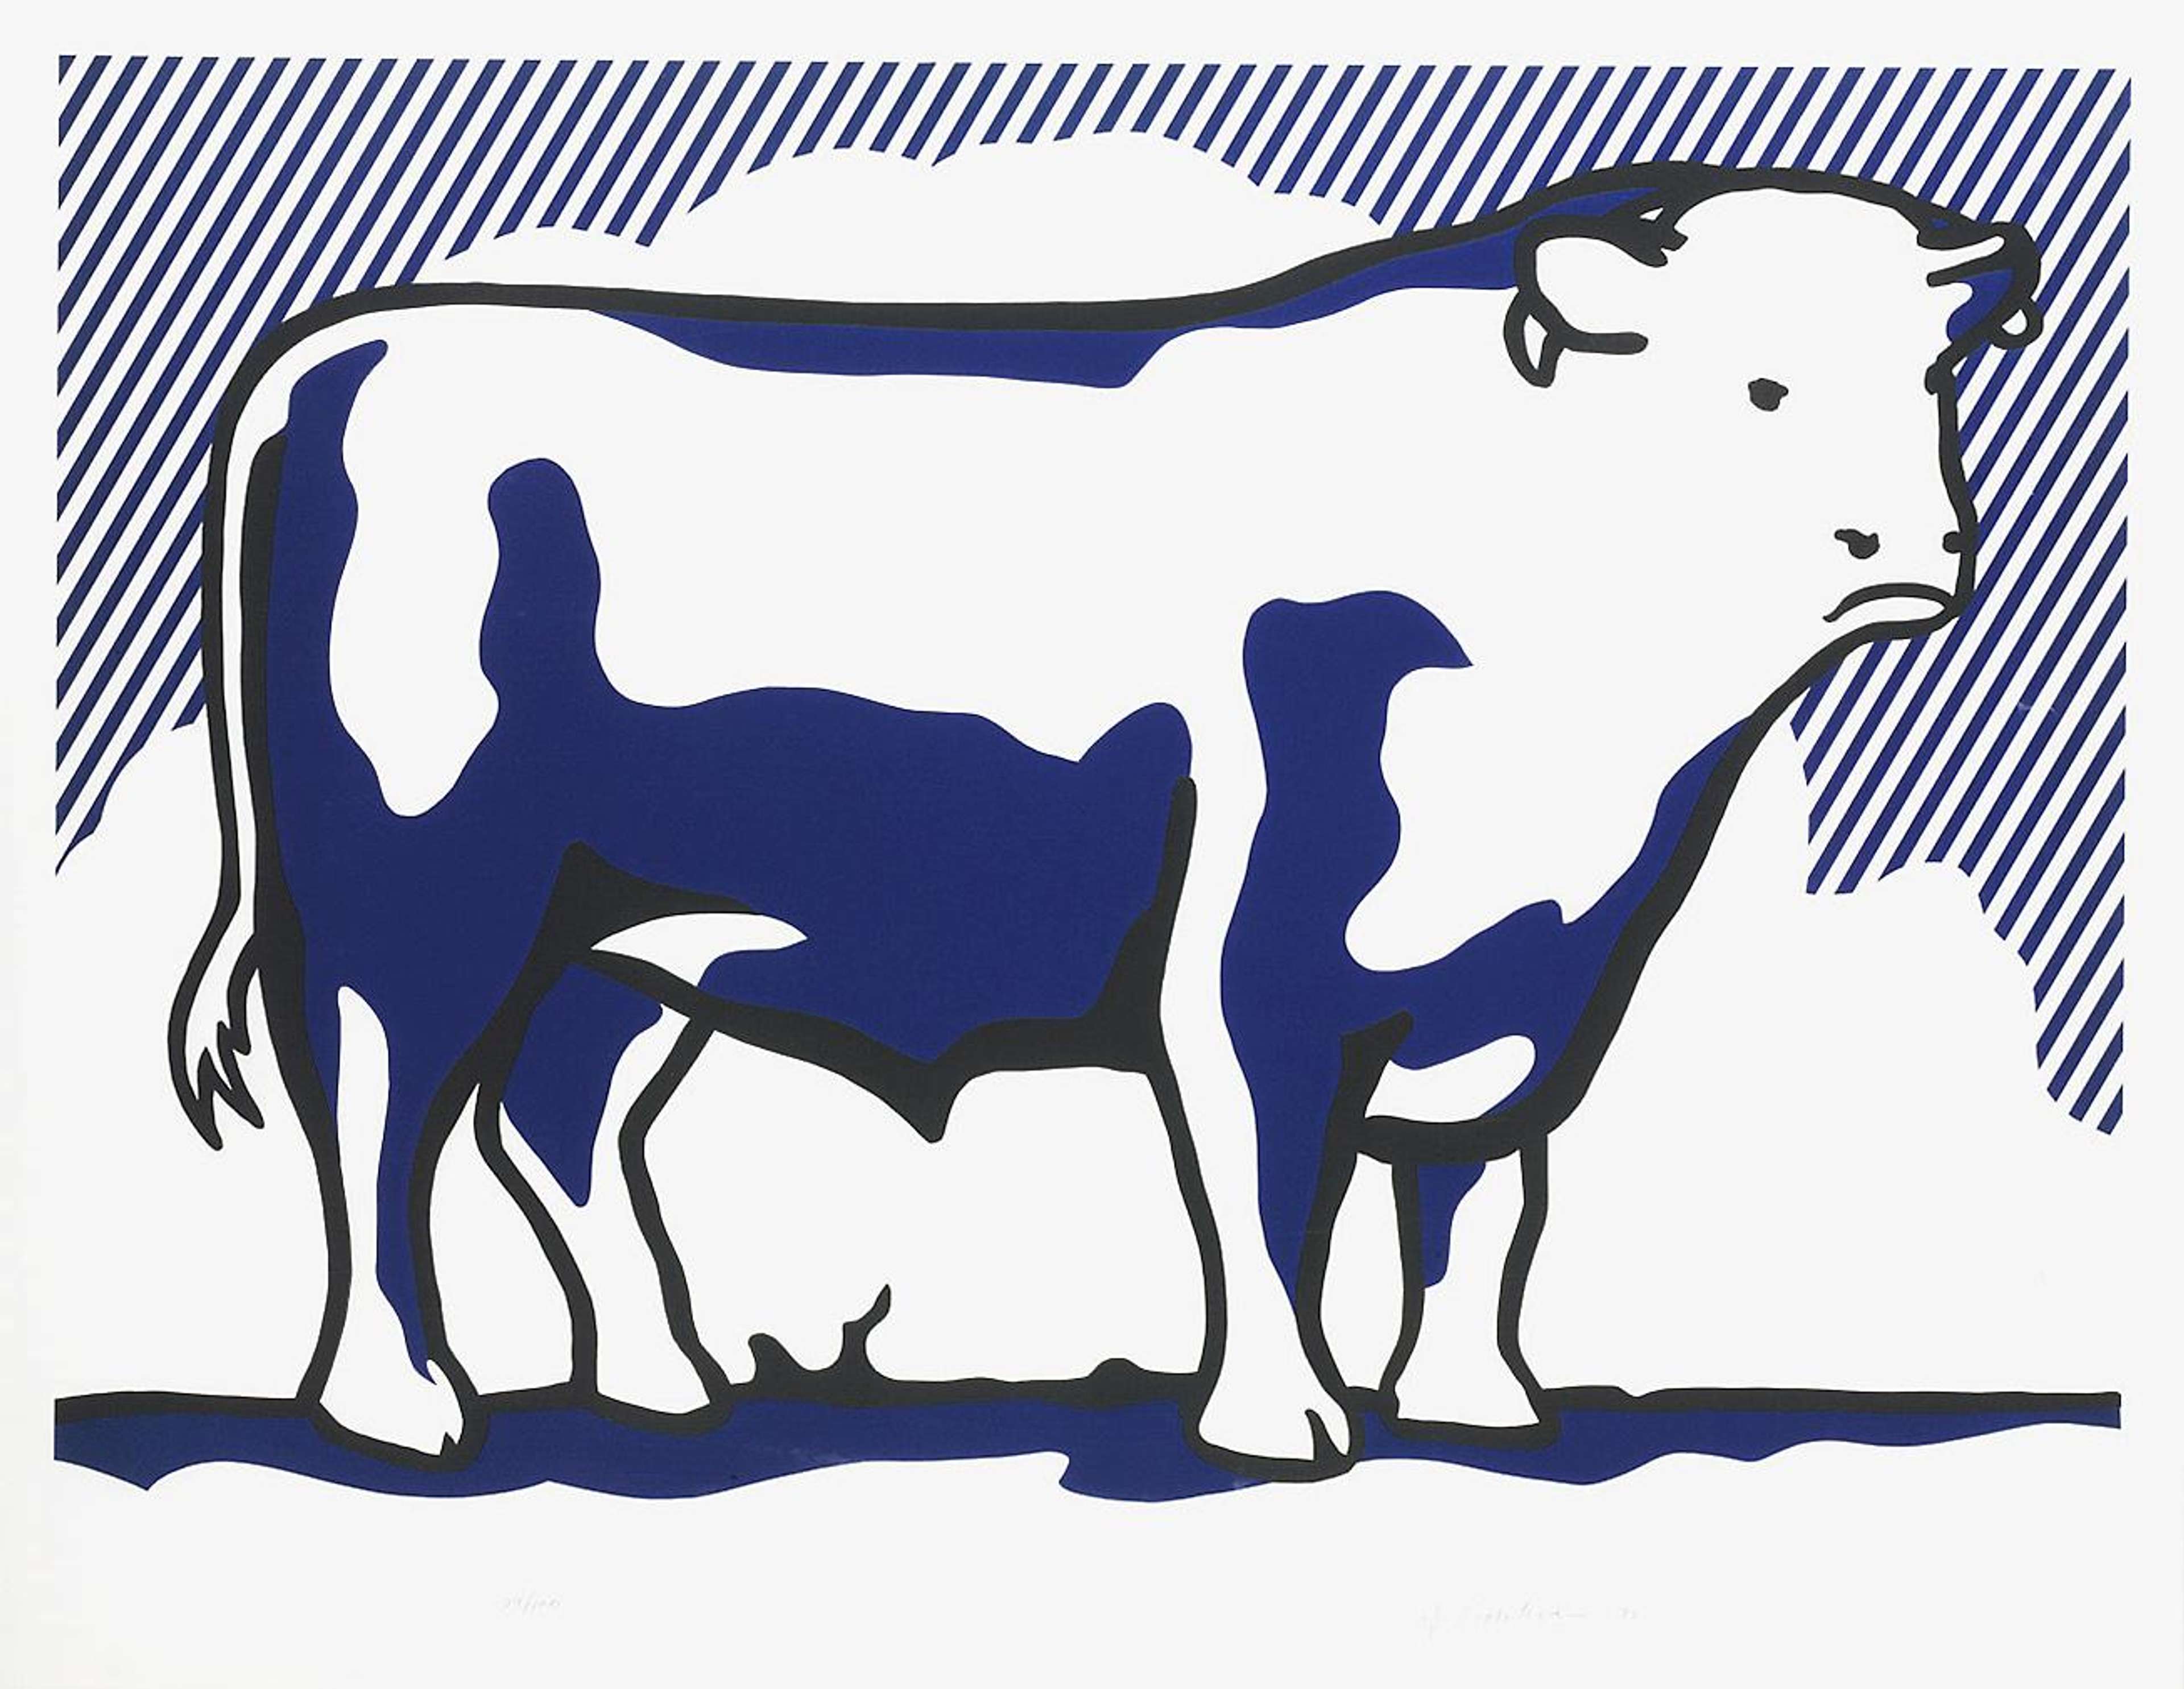 Bull II depicts its subject matter as centred and only slightly more abstracted than Bull I.Adjusting minor details, like the background and the colour scheme, the bull here appears in vivid blue, blending into an equally blue striped background. Both the primary colour and the patterns are signatures of Lichtenstein’s comic book style. The combination of blue and white makes the outline of the bull appear softer and the overall composition flatter.